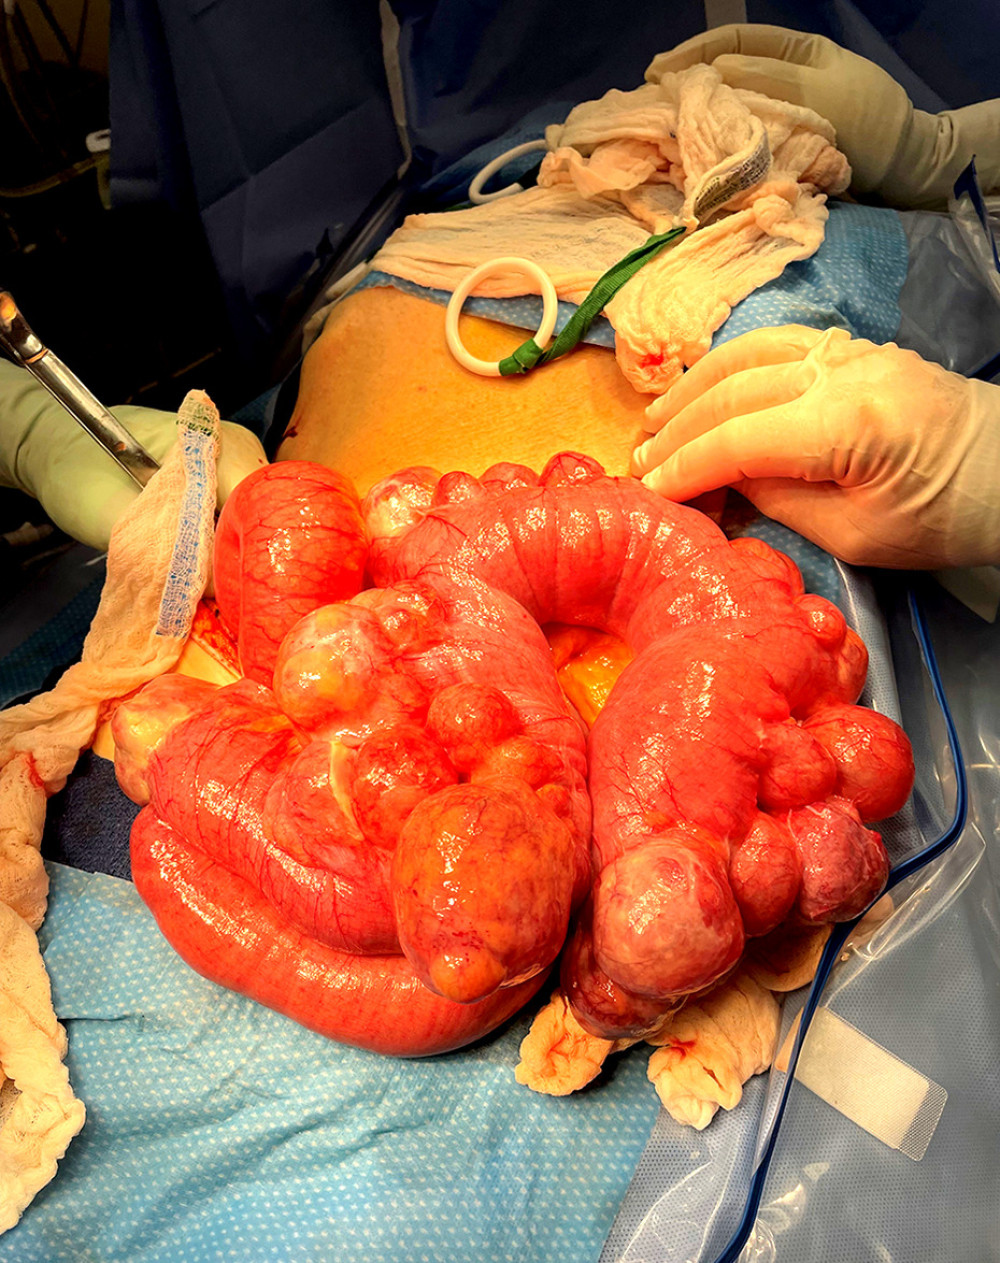 Surgical specimen showing resected segment of dilated proximal jejunum with large jejunal diverticula, with some diverticula showing ischemic changes.